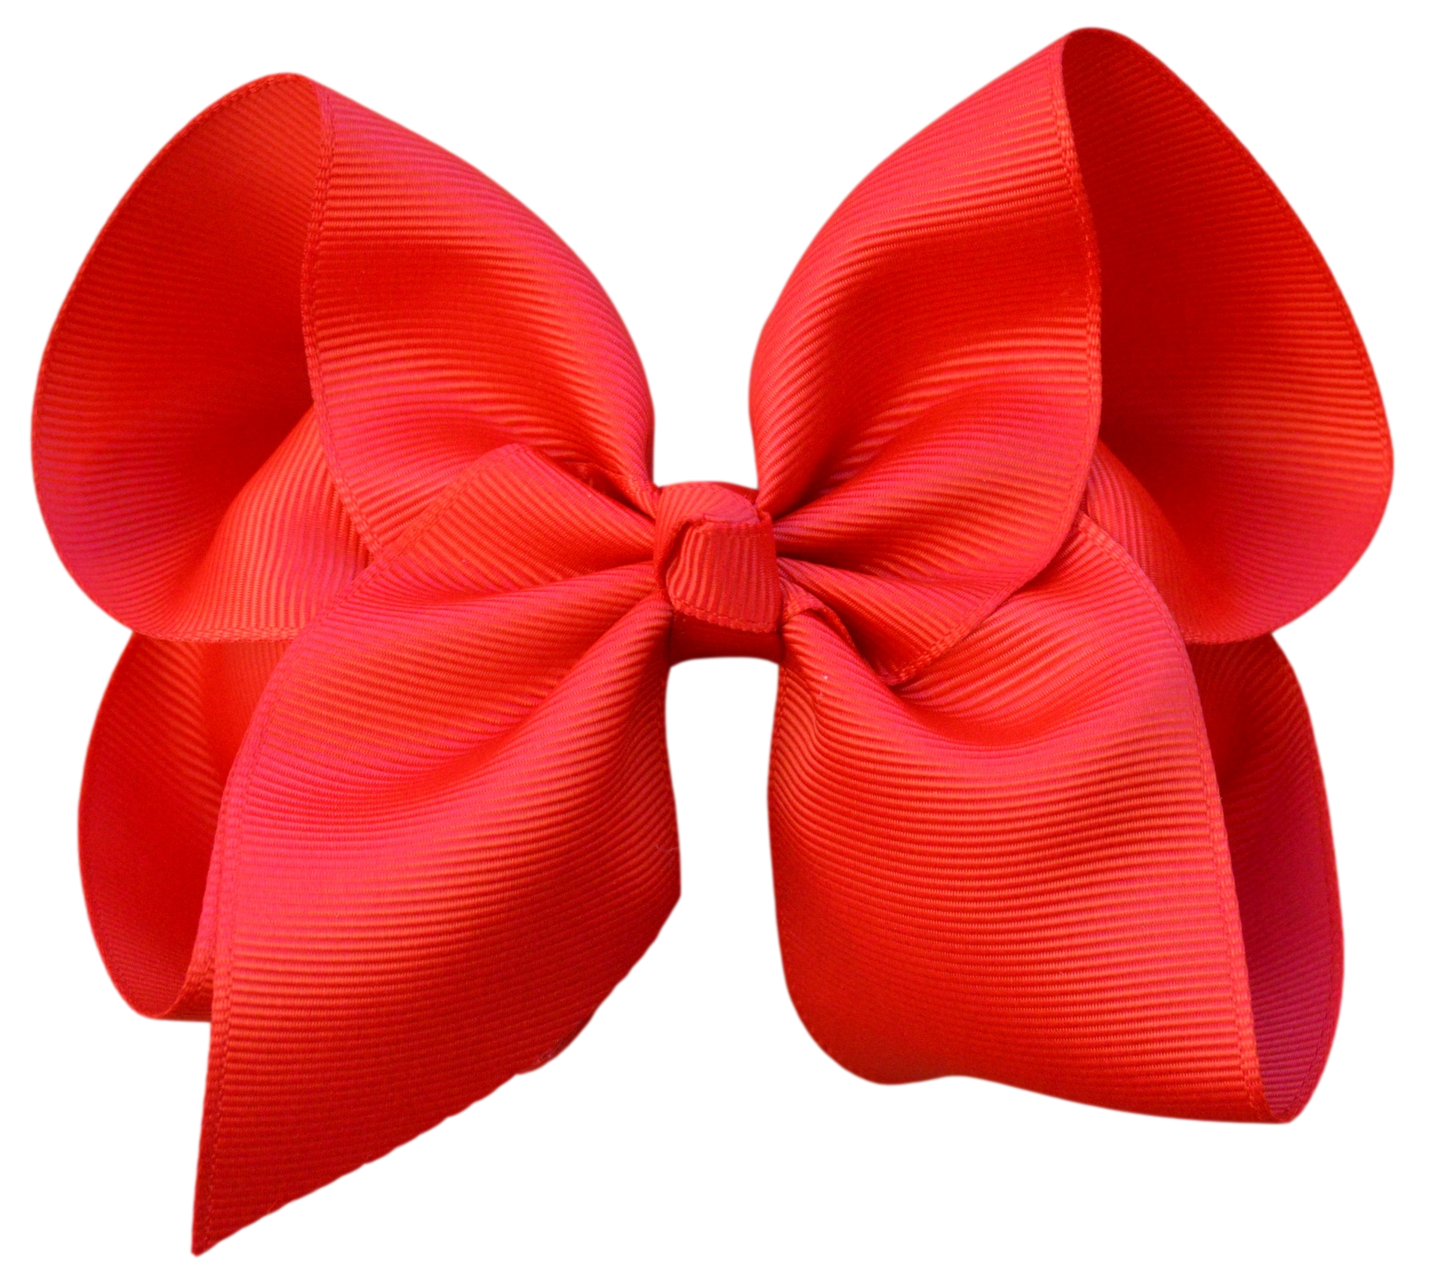 The Solid Bow - 5 inch Solid Grosgrain Bow